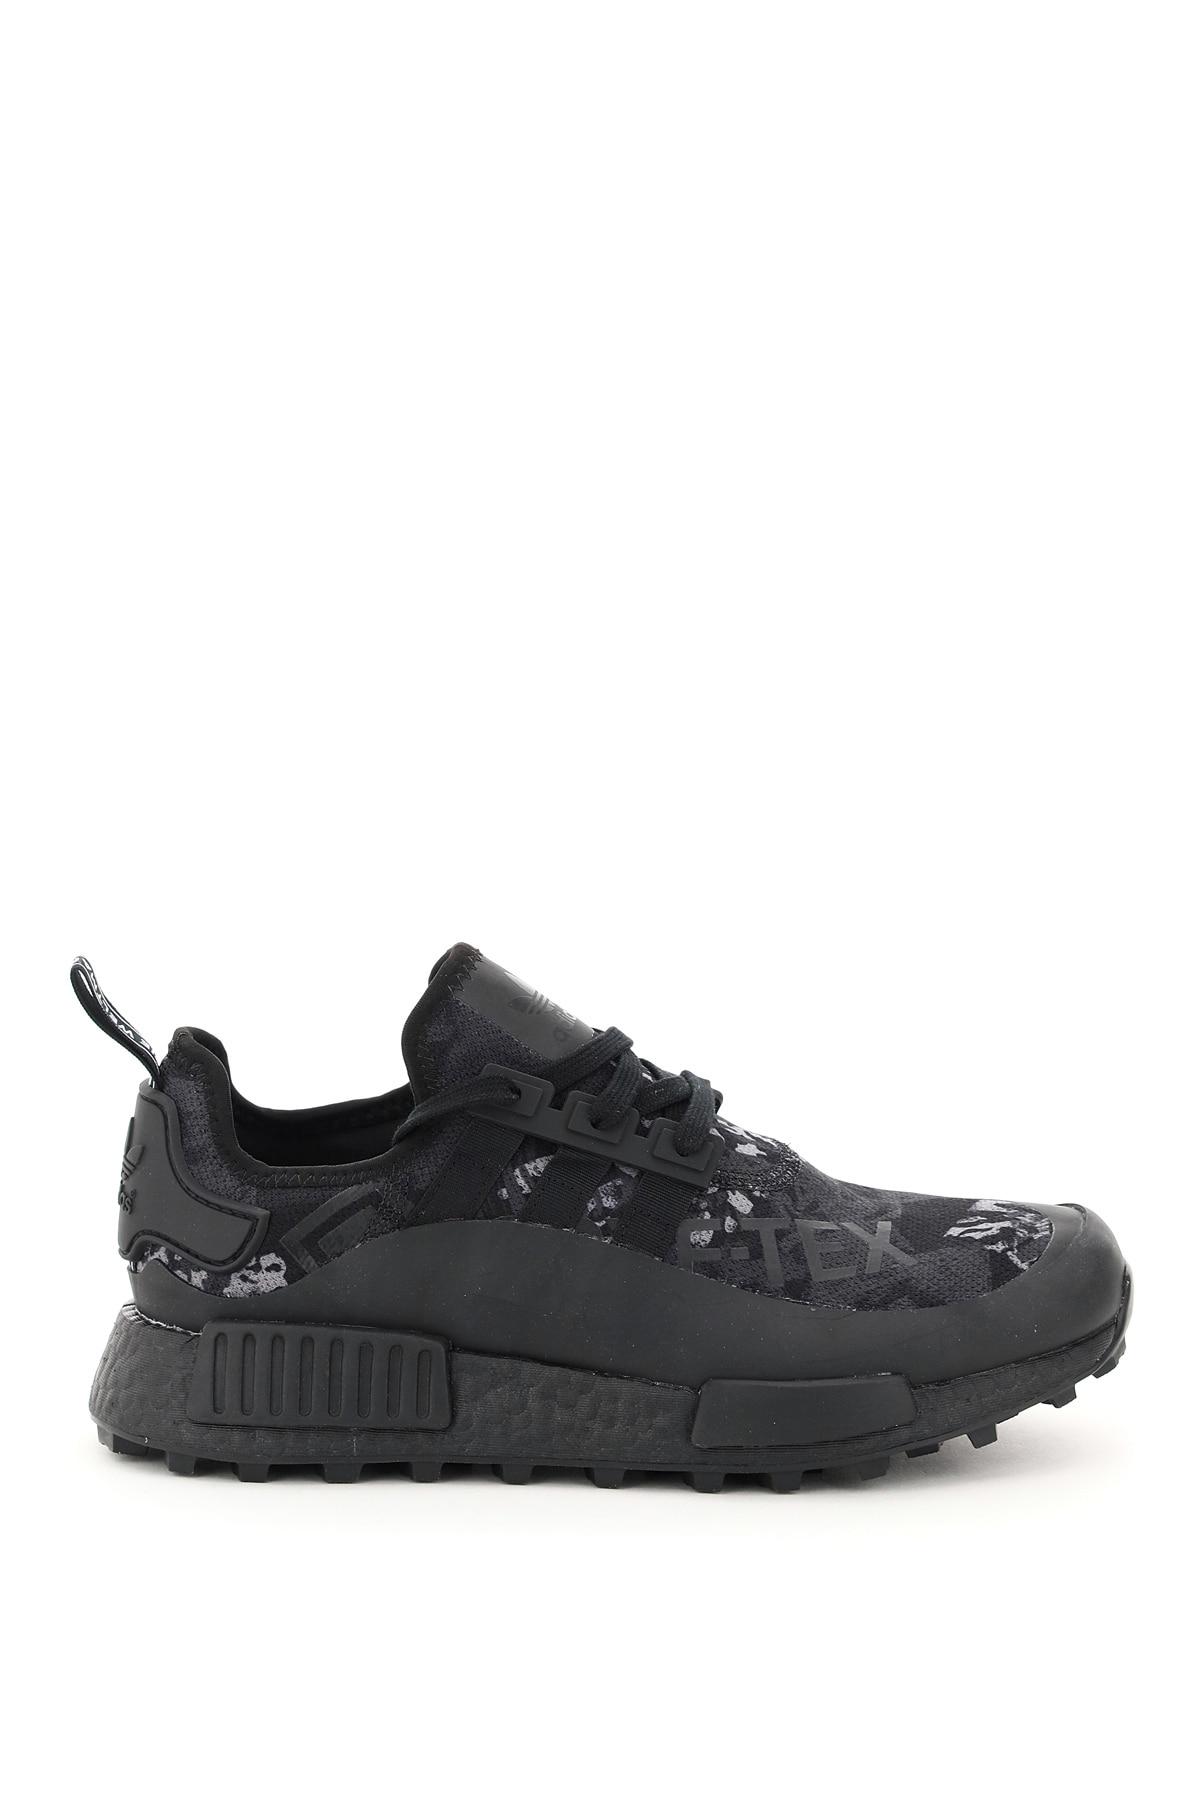 adidas Rubber Nmd R1 Gore-tex Sneakers in for Men - Lyst